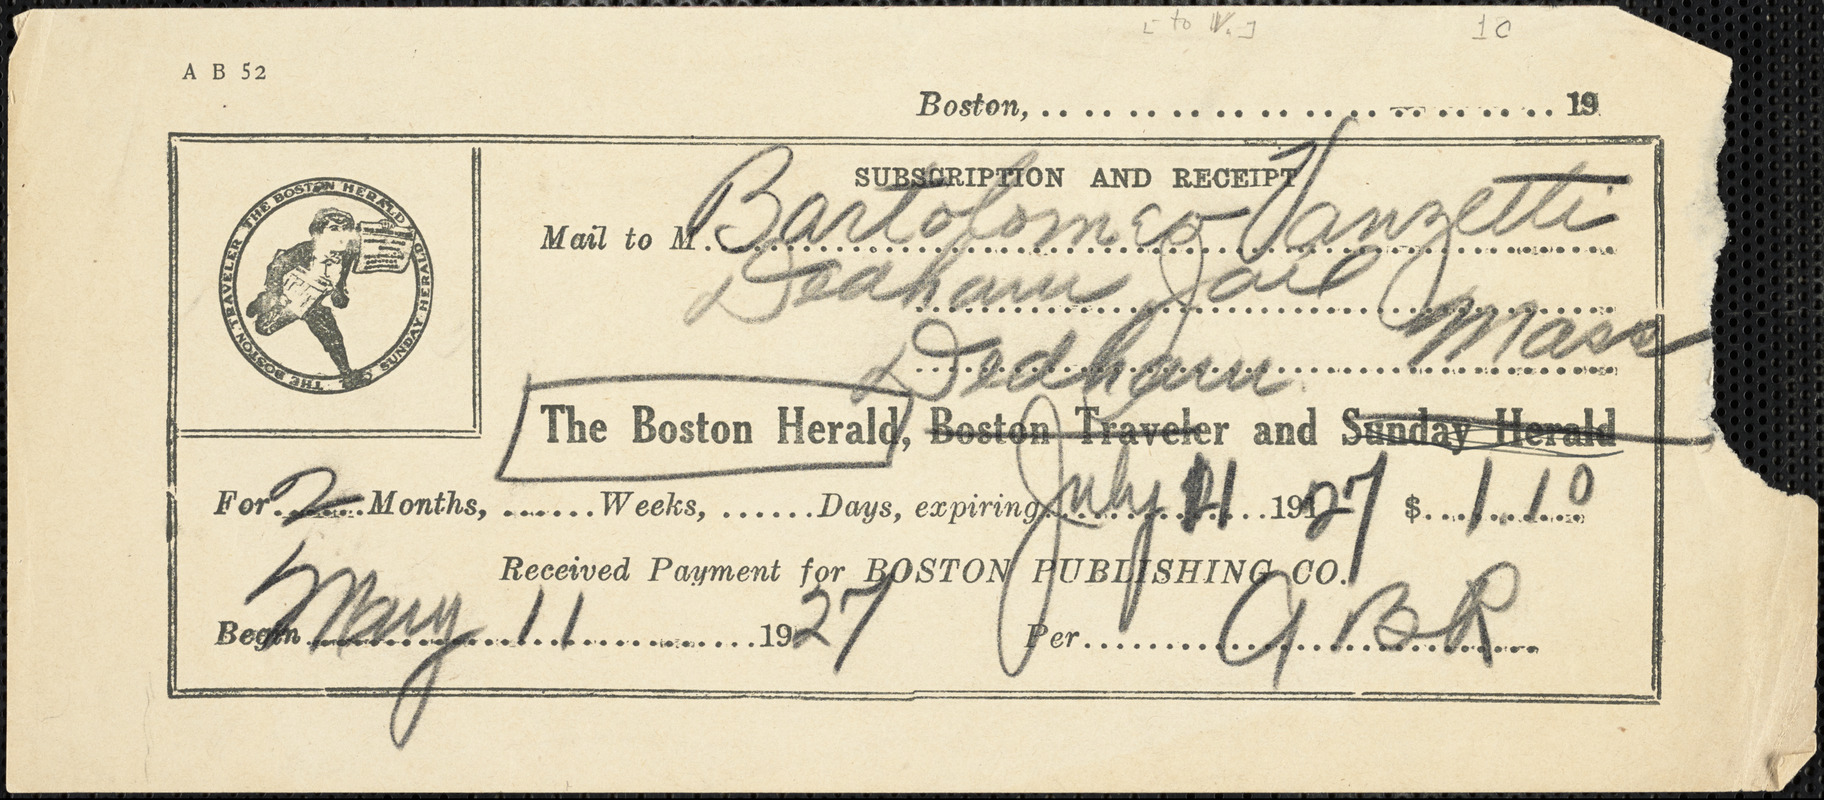 The Boston Herald 2 month subscription receipt from May 11, 1927 to July 11 1927 for Bartolomeo Vanzetti